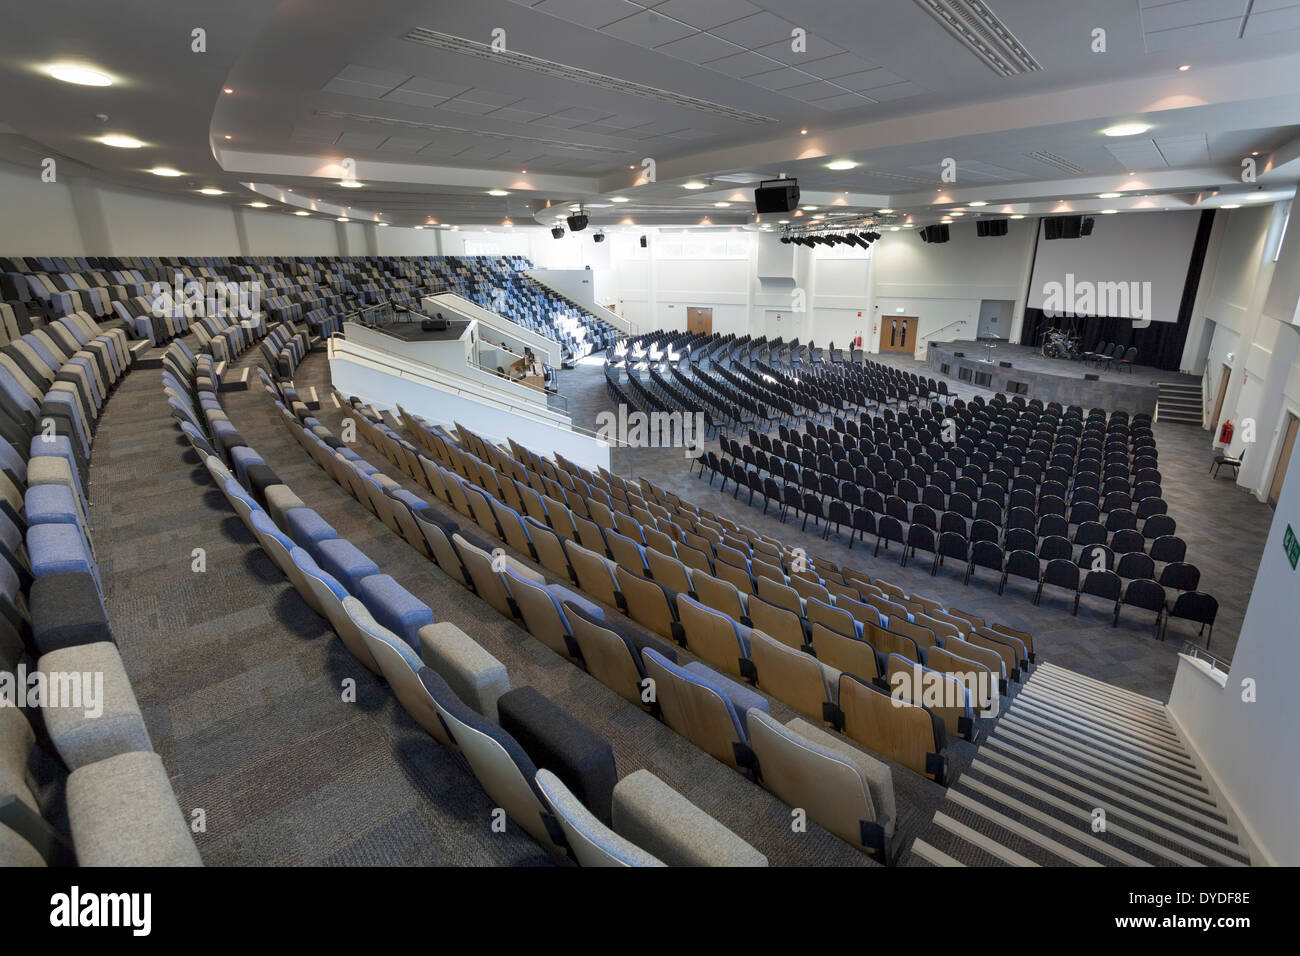 Kings Community church interior with tiered seating. Stock Photo